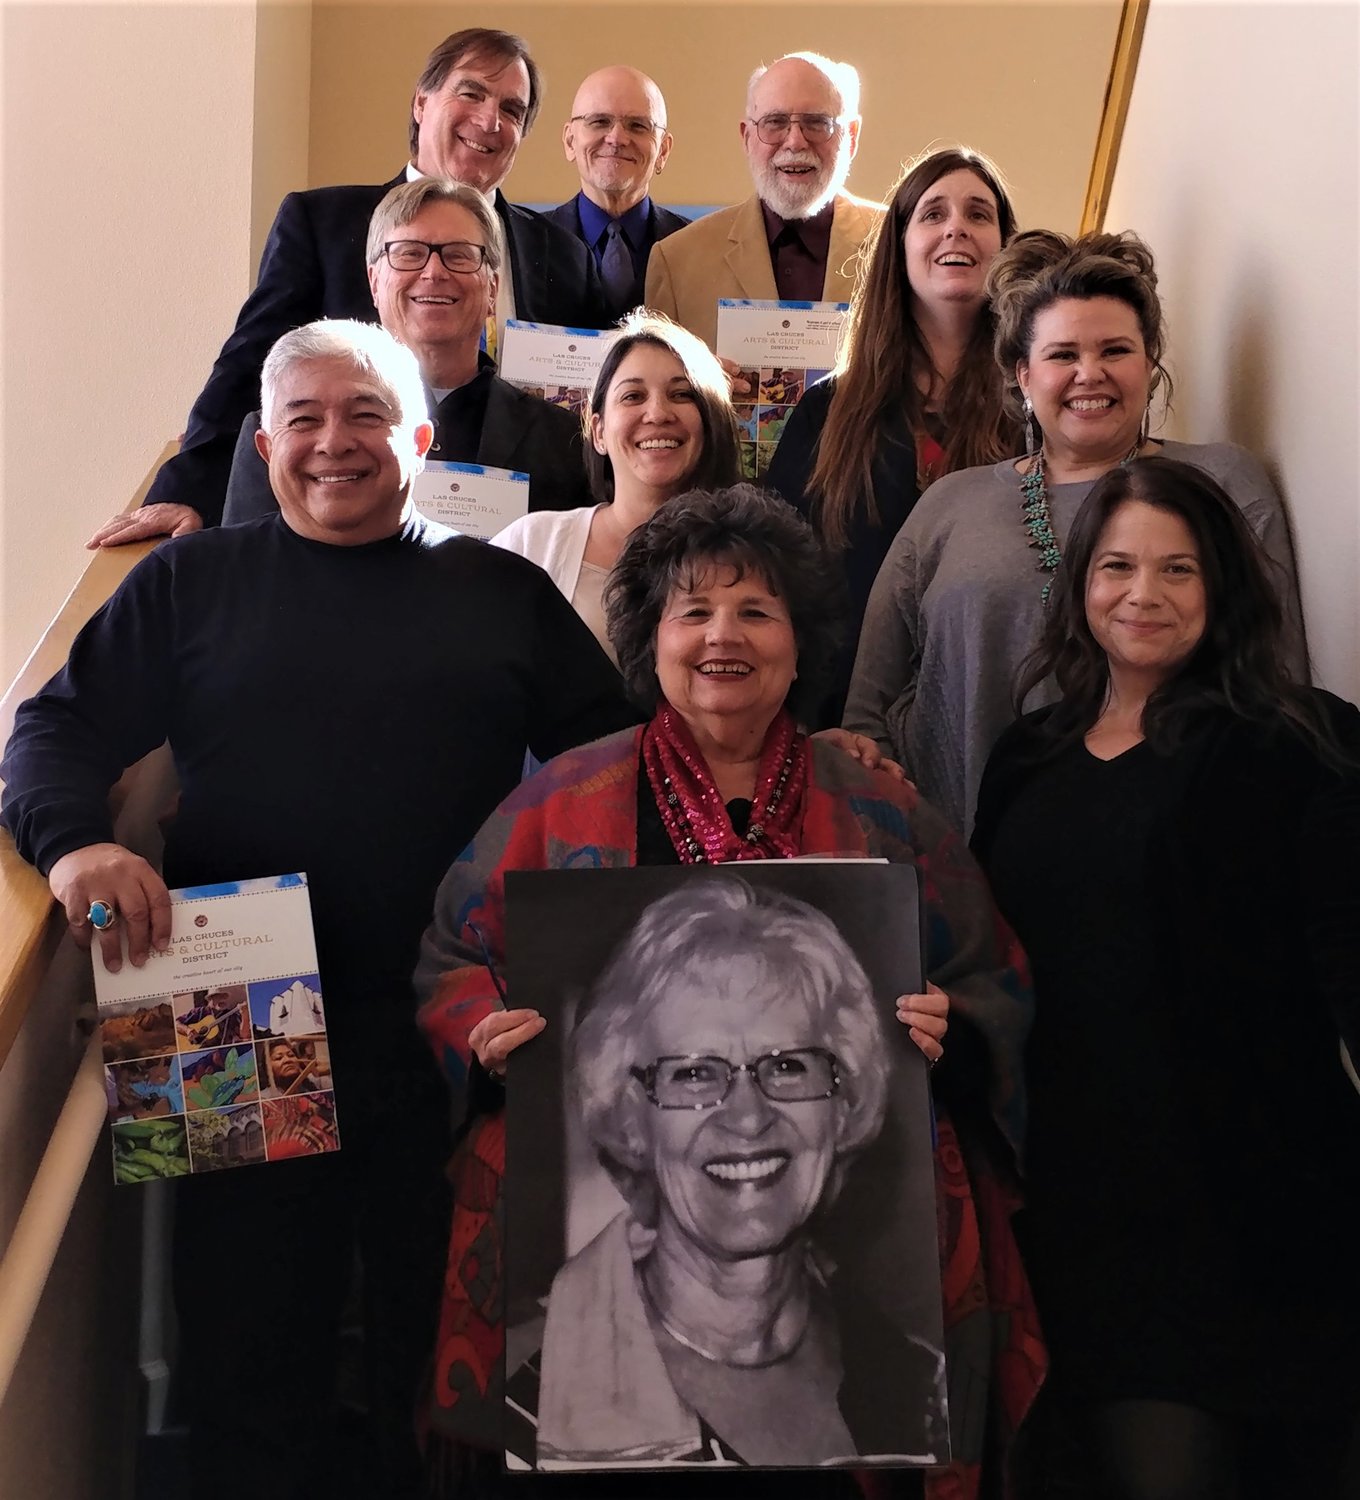 Photos courtesy of Las Cruces Arts and Culture District Coordinating Council
Members of the Las Cruces Arts and Cultural District Coordinating Council are, left to right, bottom row, Chair David Chavez, Irene-Oliver Lewis (holding a photo of founding member Kathleen Squires), Marisa Sage; second row, Julianne Lackey, Jennifer Garcia Kozlowski; third row, Greg Smith, Wayne Carl Huber; fourth row, Mike Cook (former council member).